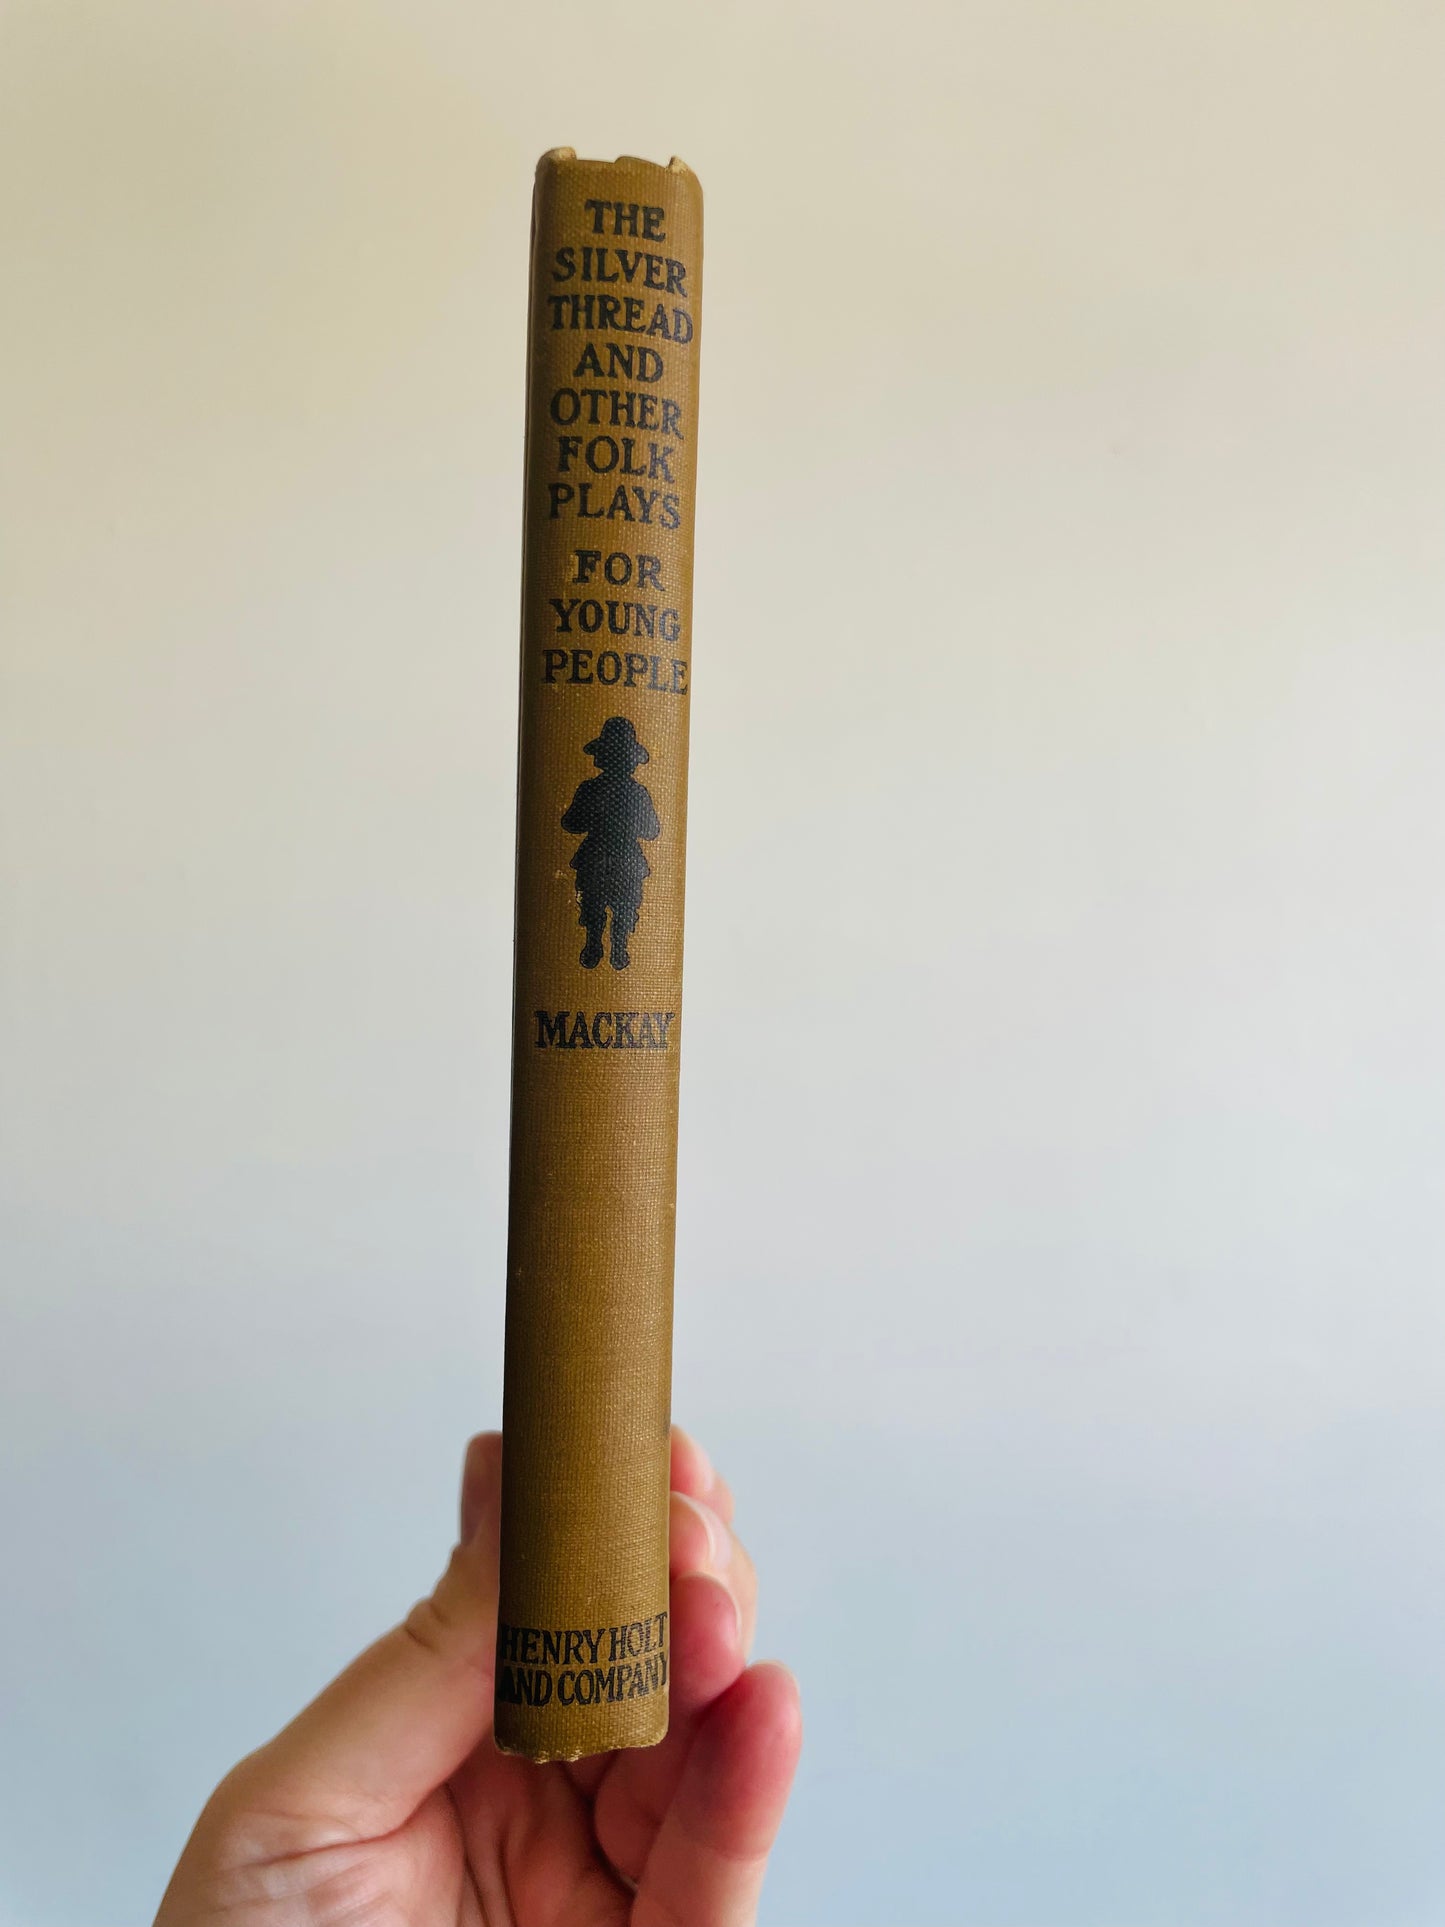 *RARE* The Silver Thread & Other Folk Plays for Young People - Constance D'Arcy Mackay - Hardcover Book (1938)